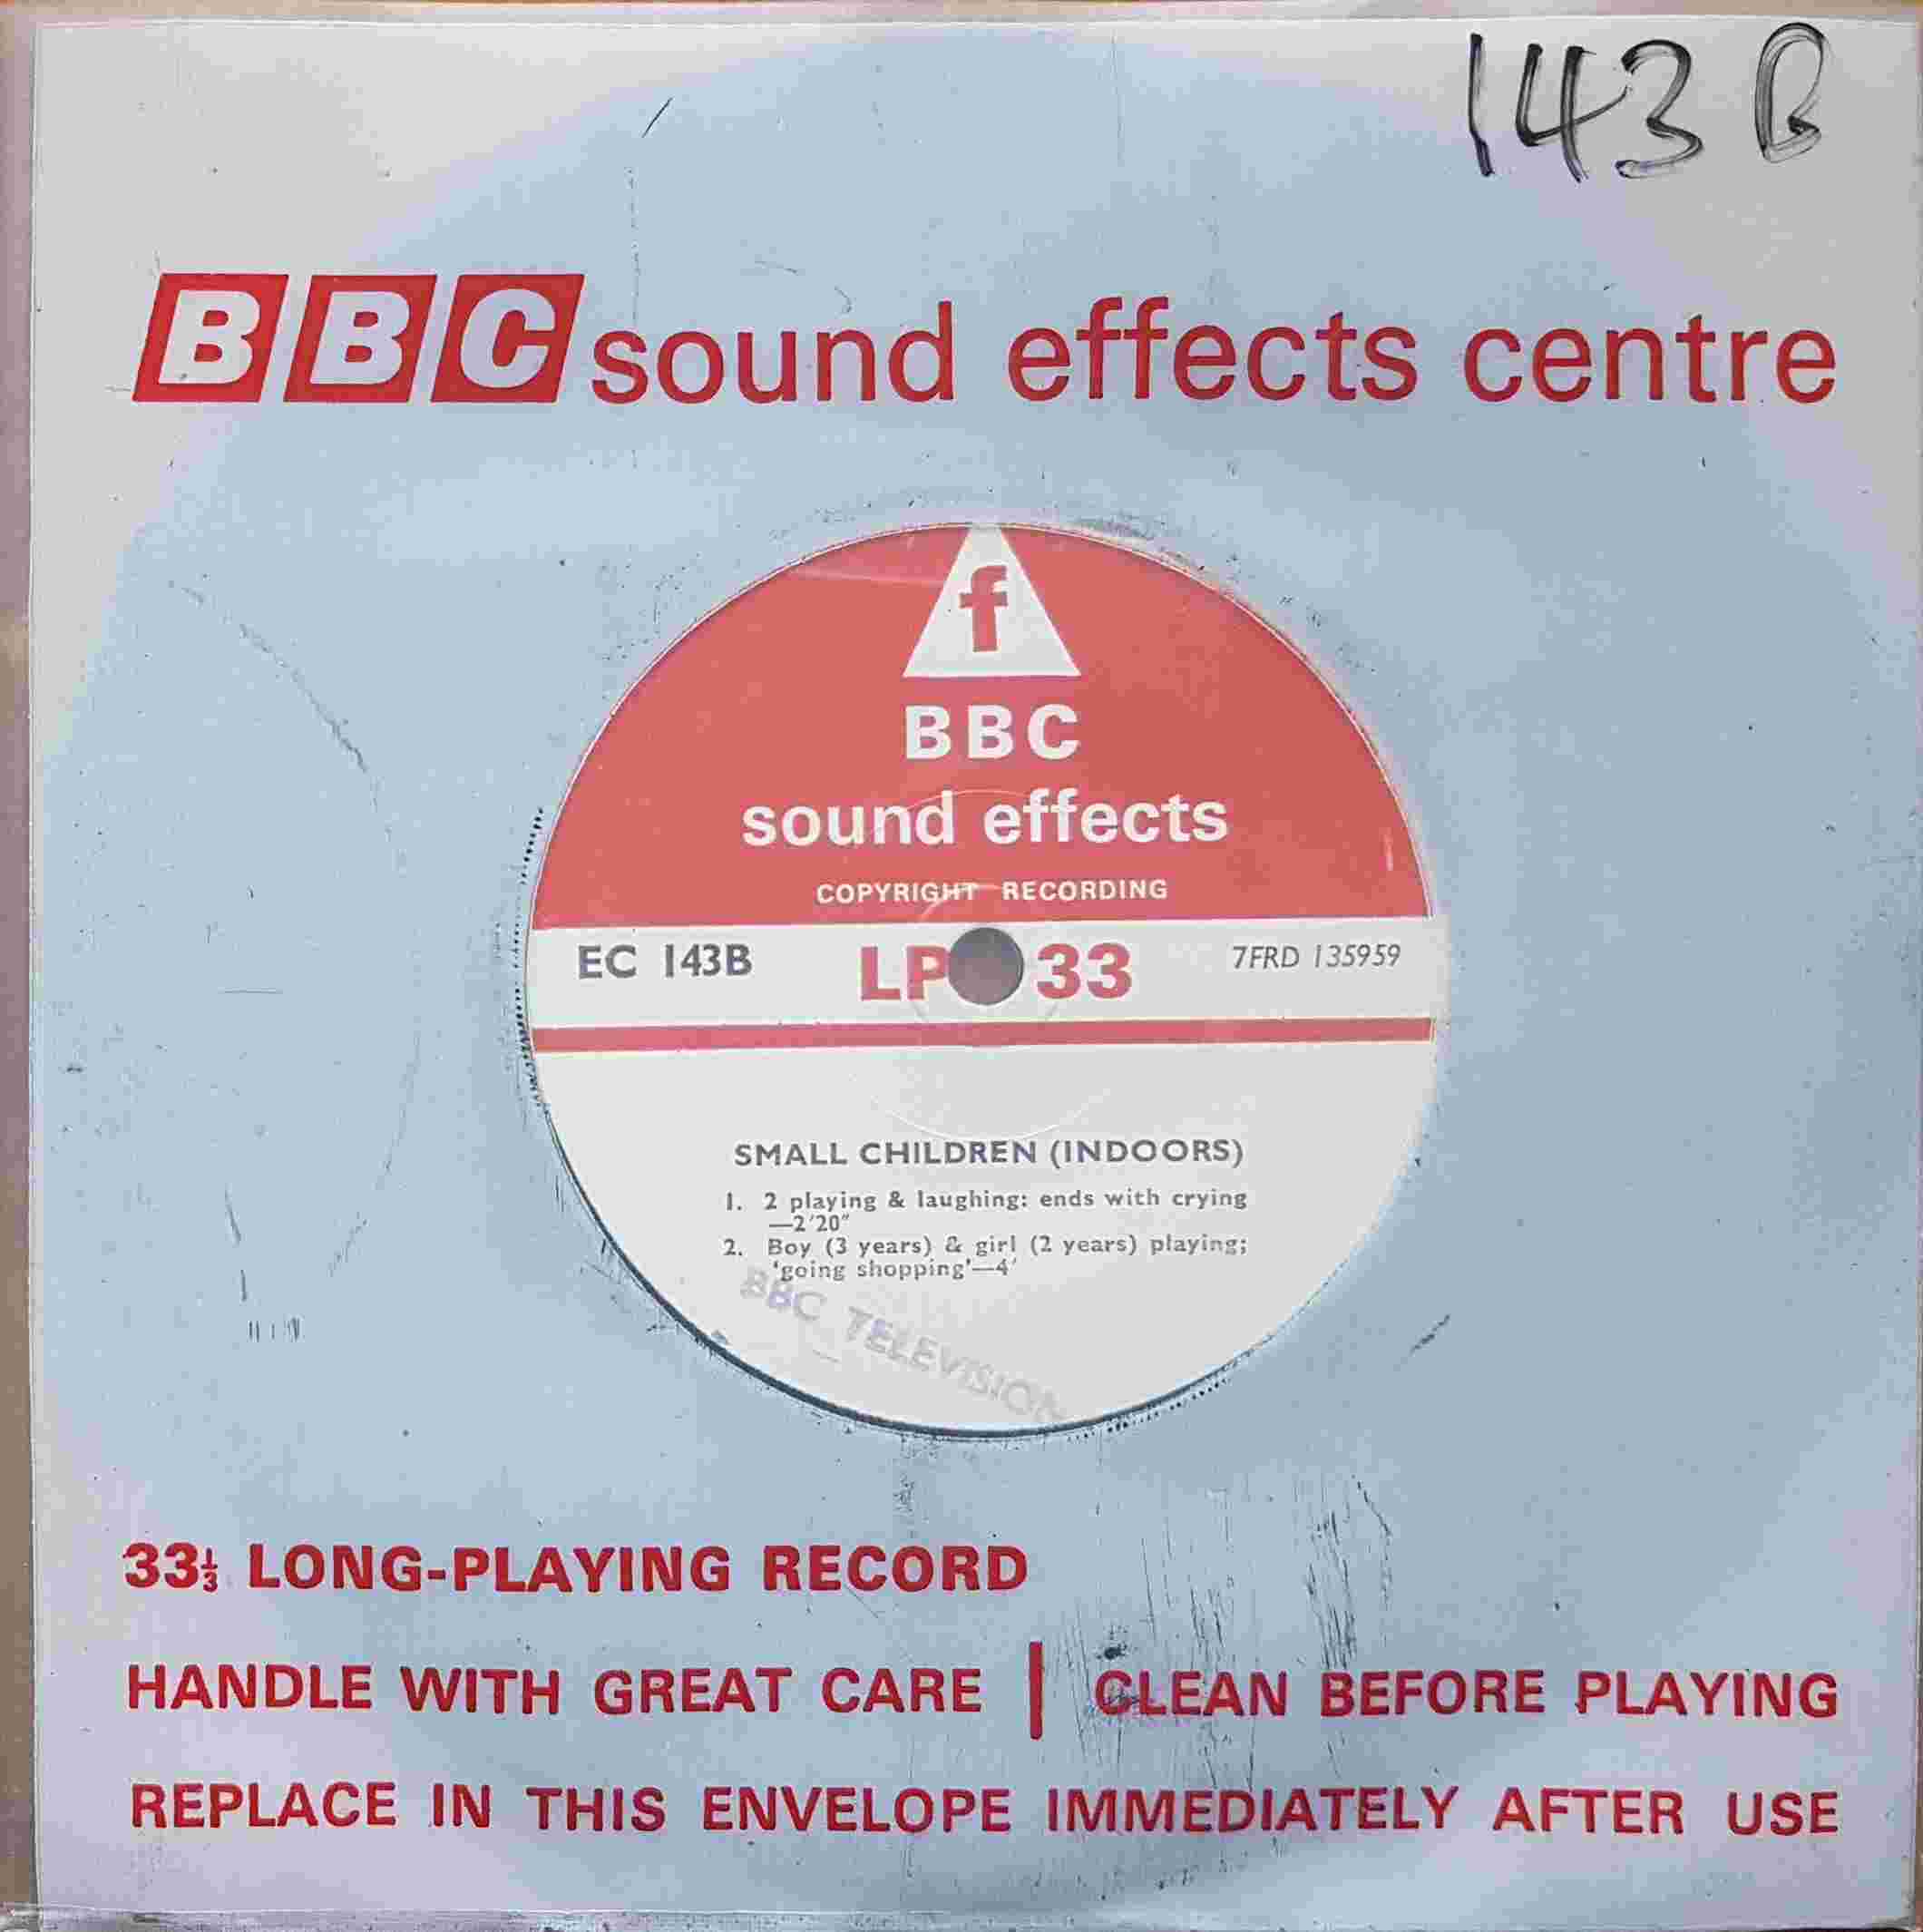 Picture of EC 143B Small children (indoors) by artist Not registered from the BBC singles - Records and Tapes library